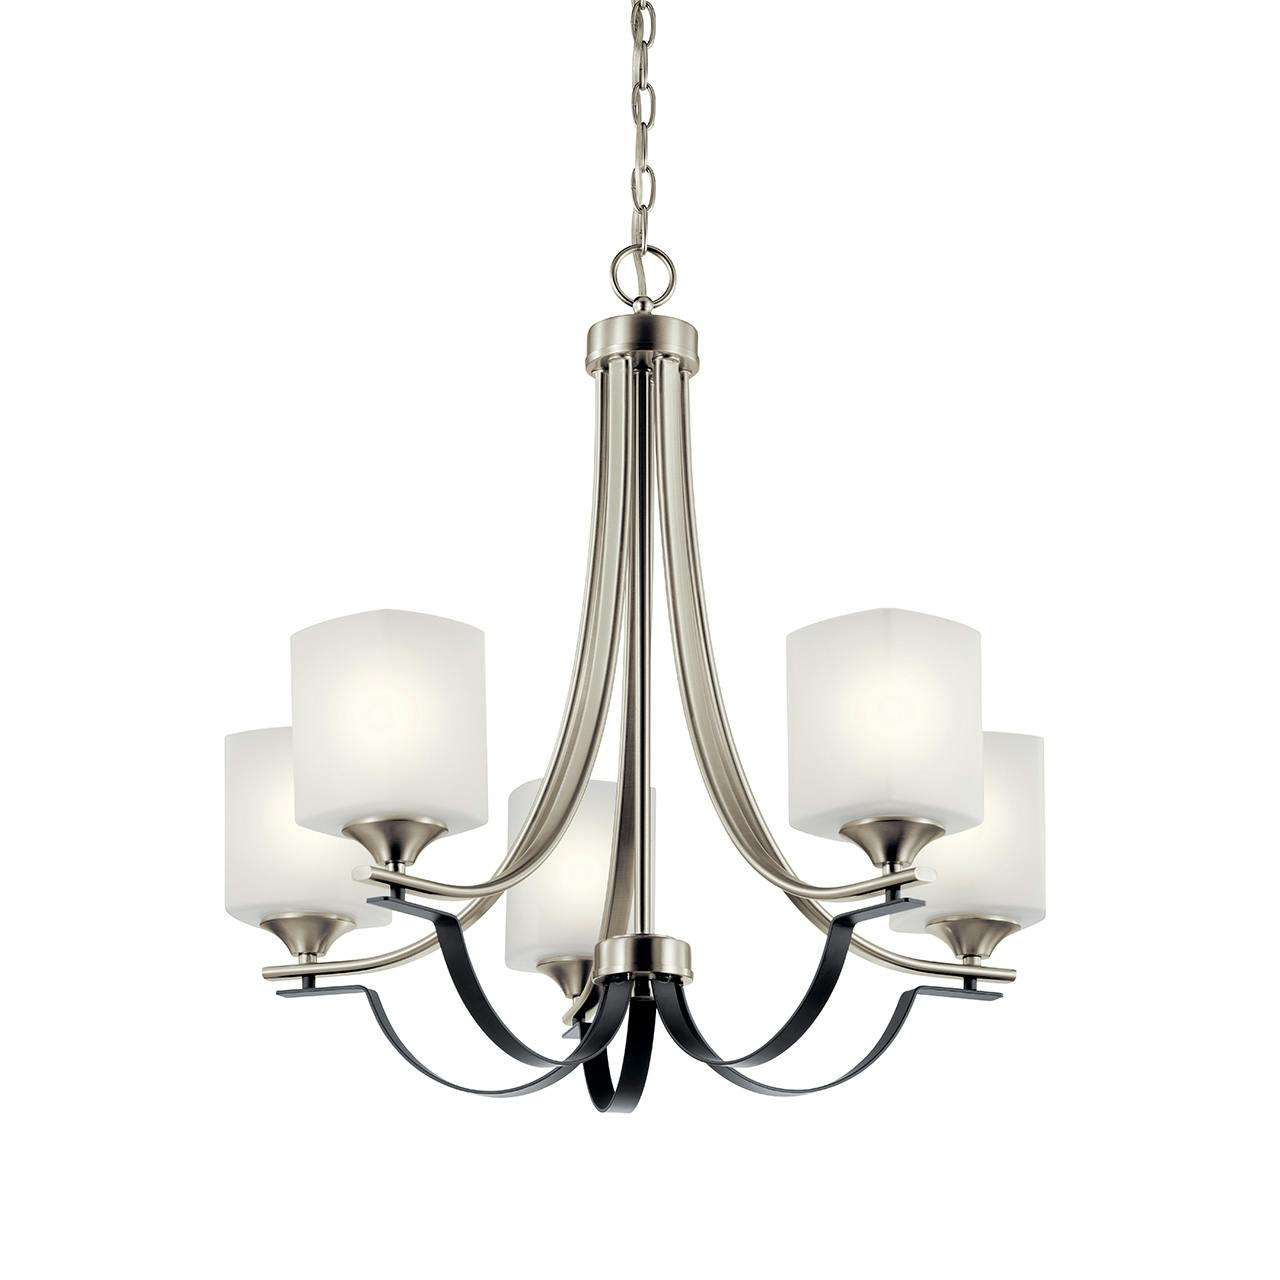 Tula™ 5 Light Chandelier Brushed Nickel without the canopy on a white background